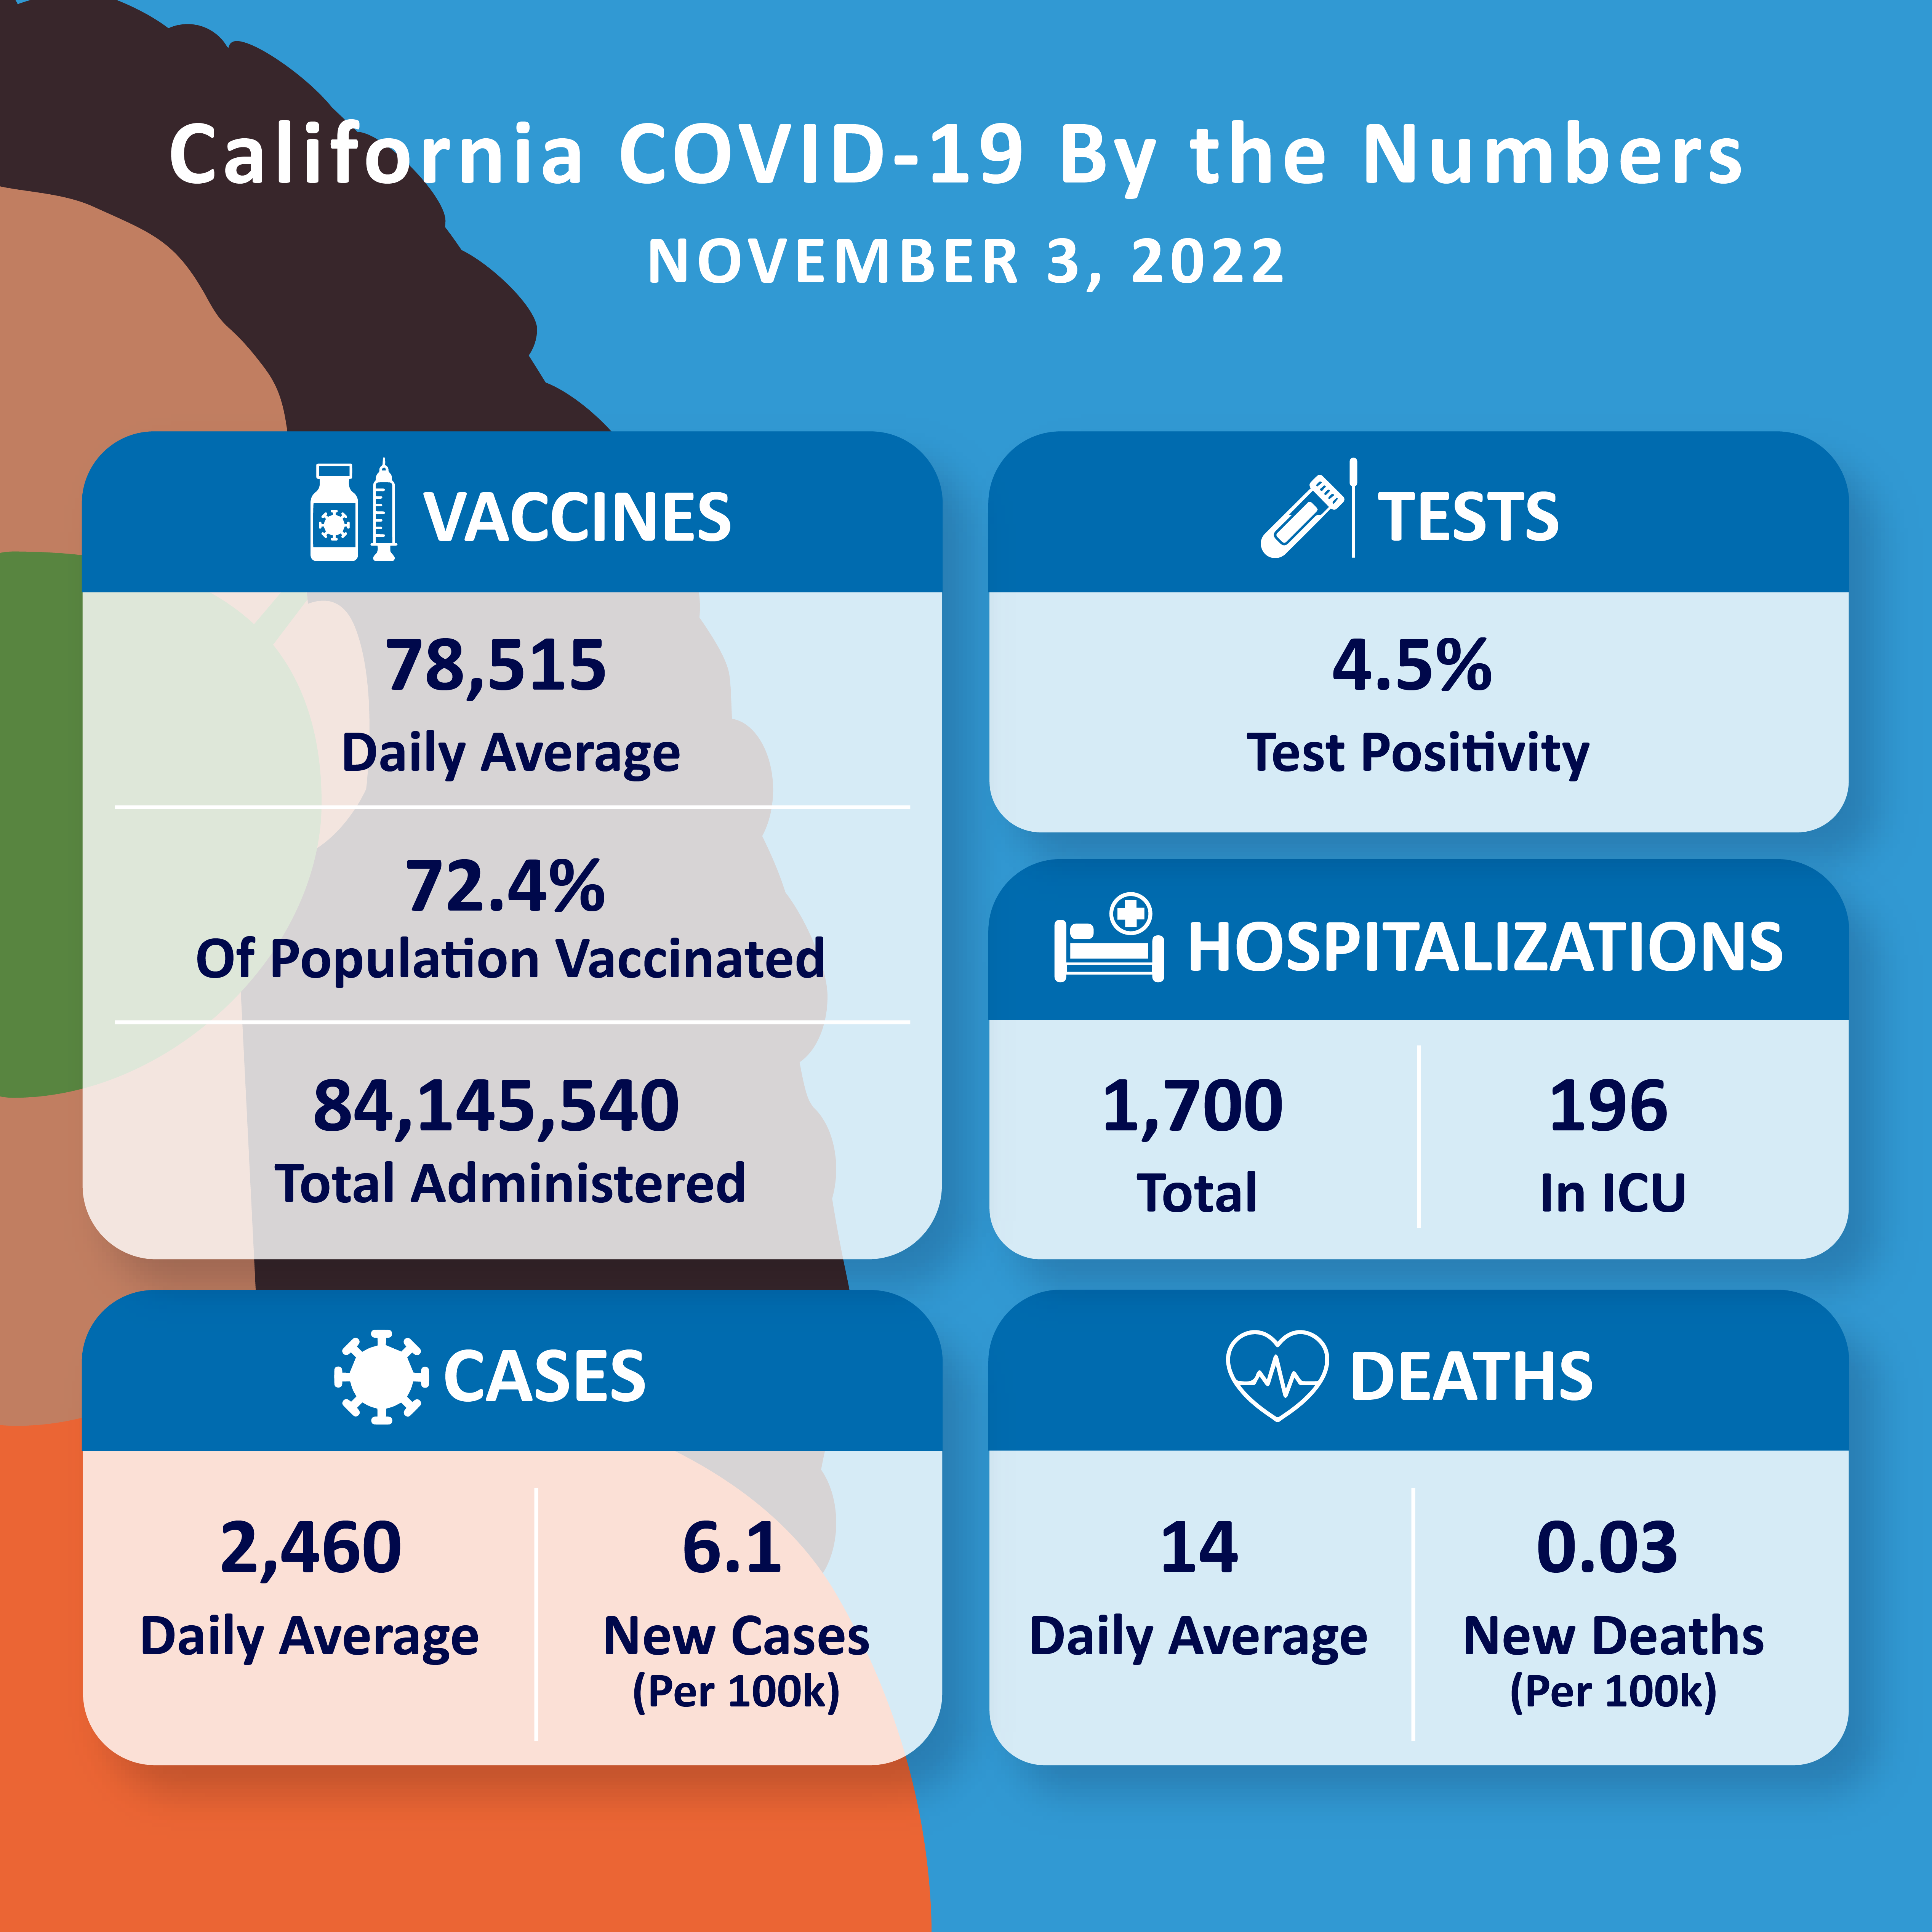 COVID-19 By the Numbers November 3, 2022